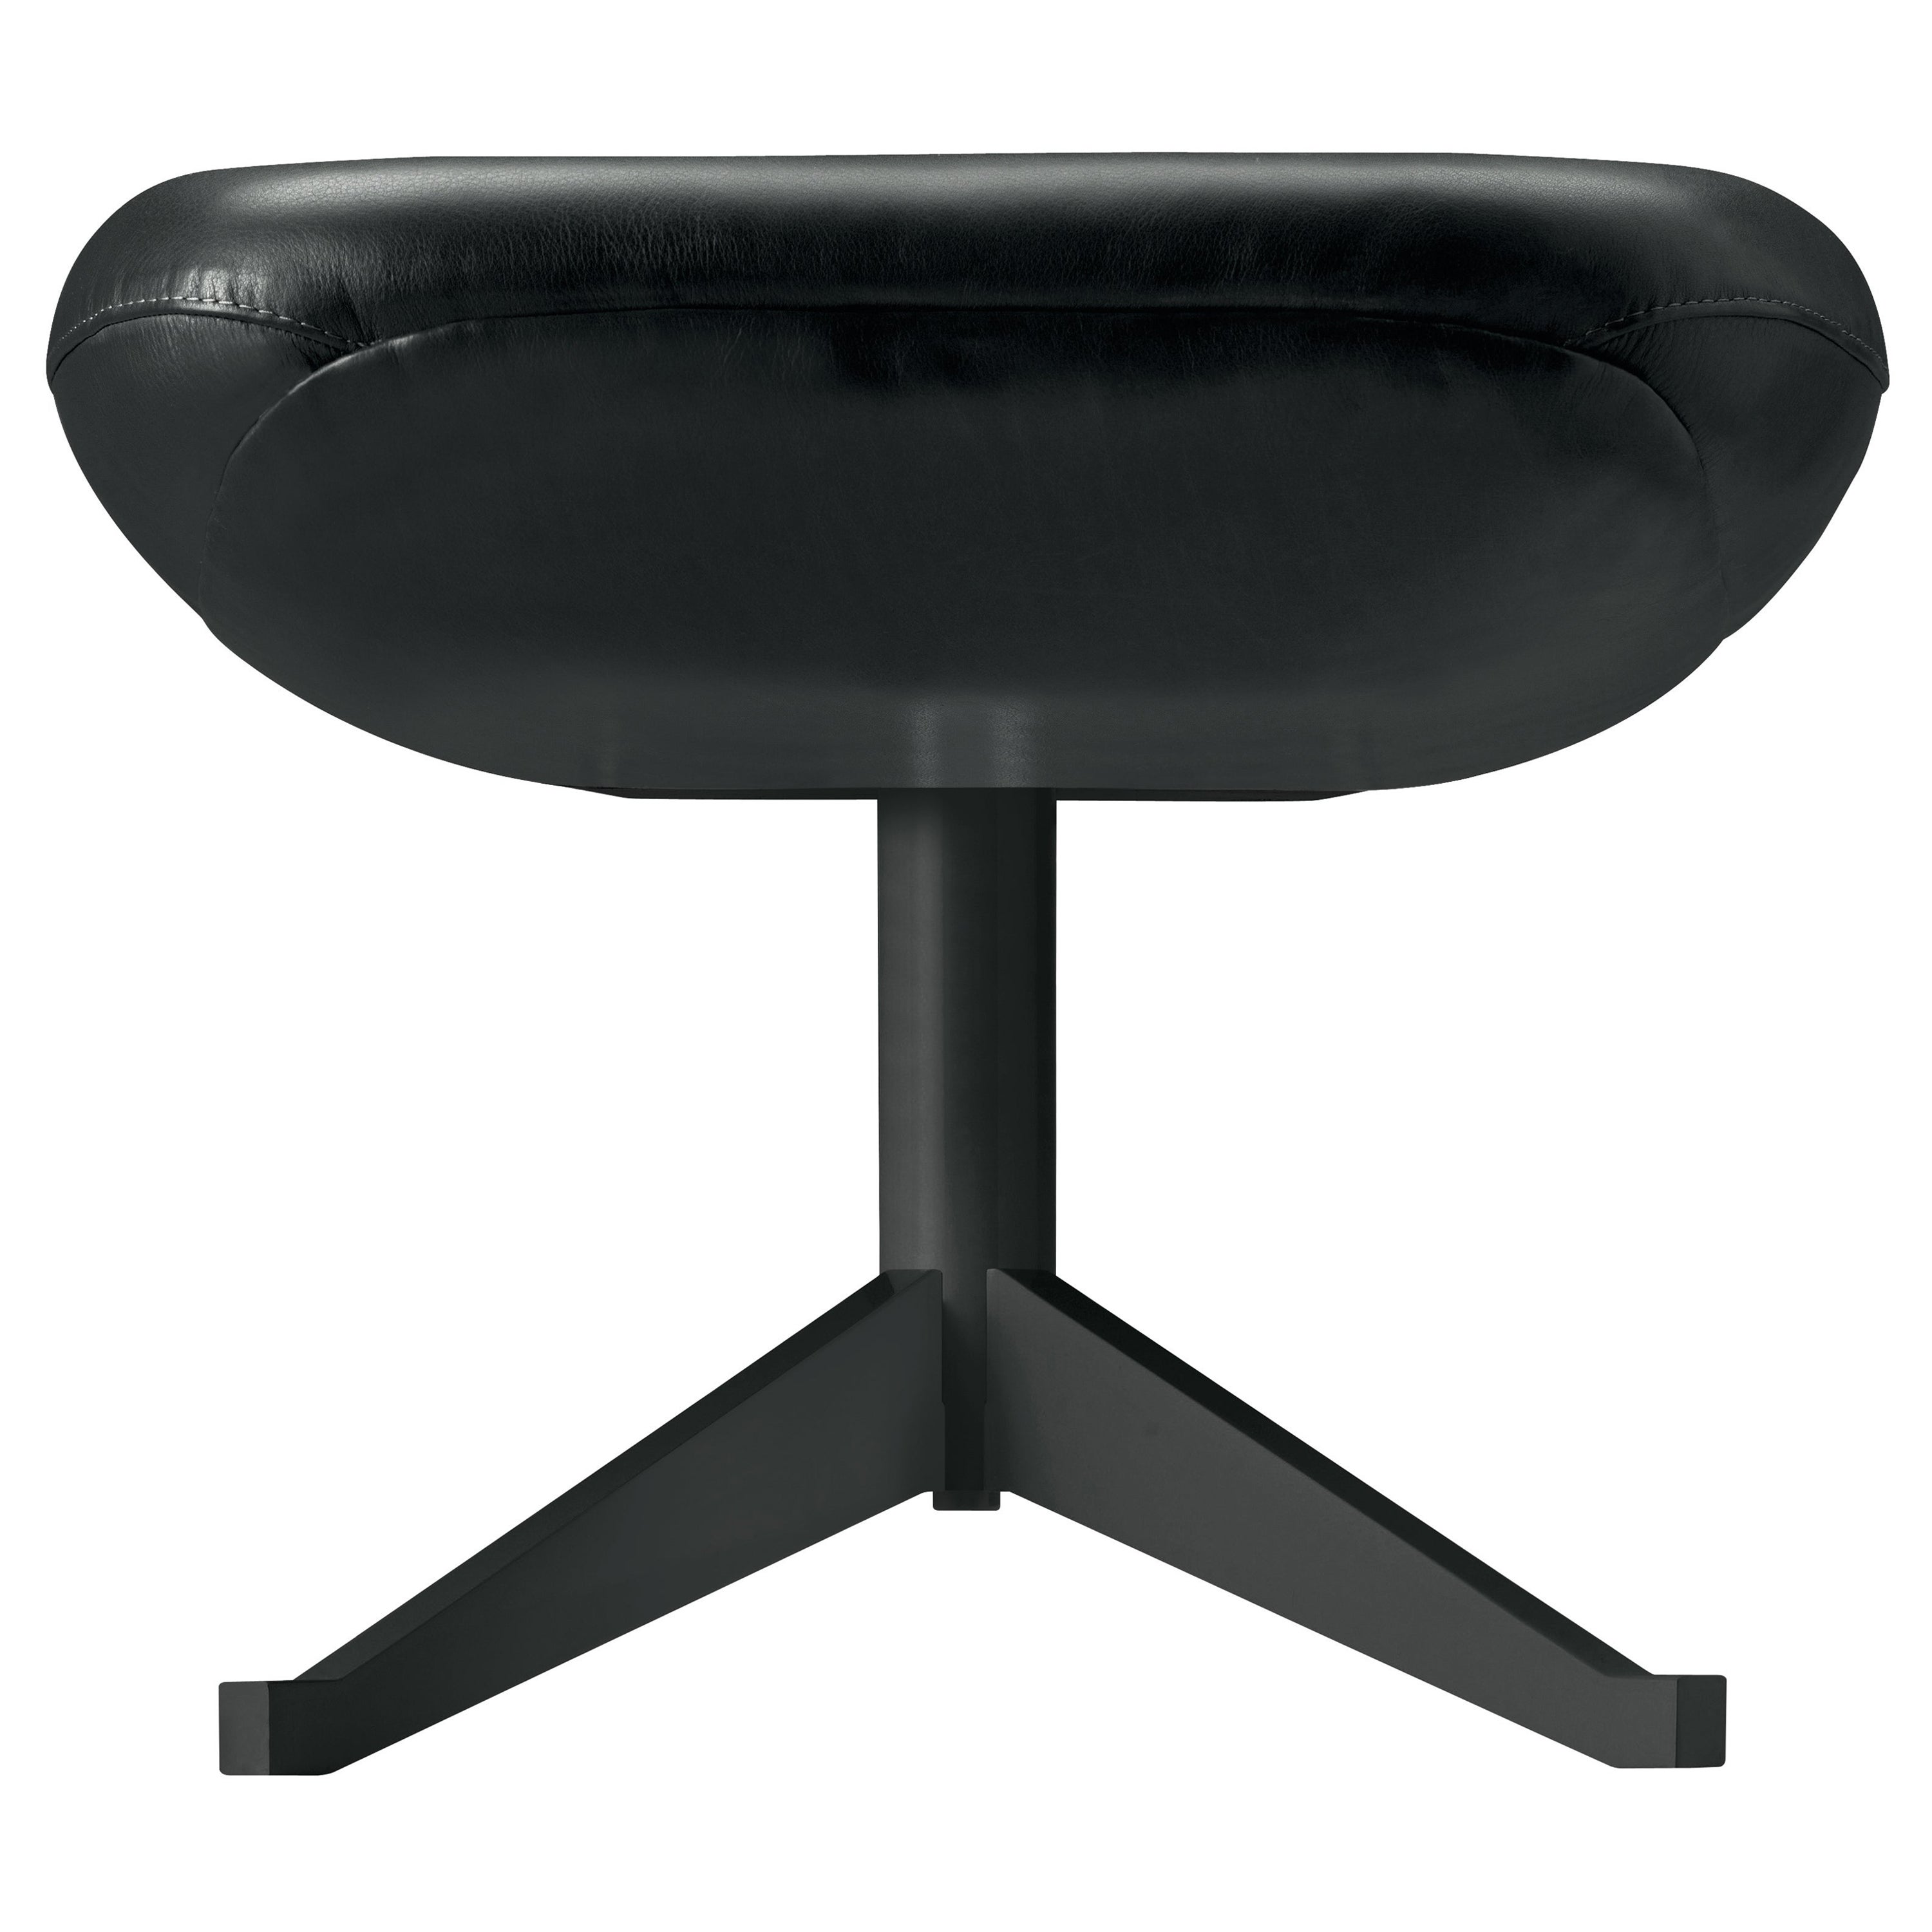 Alias 091 Manzù Pouf in Black Leather Seat with Black Lacquered Aluminum Frame For Sale